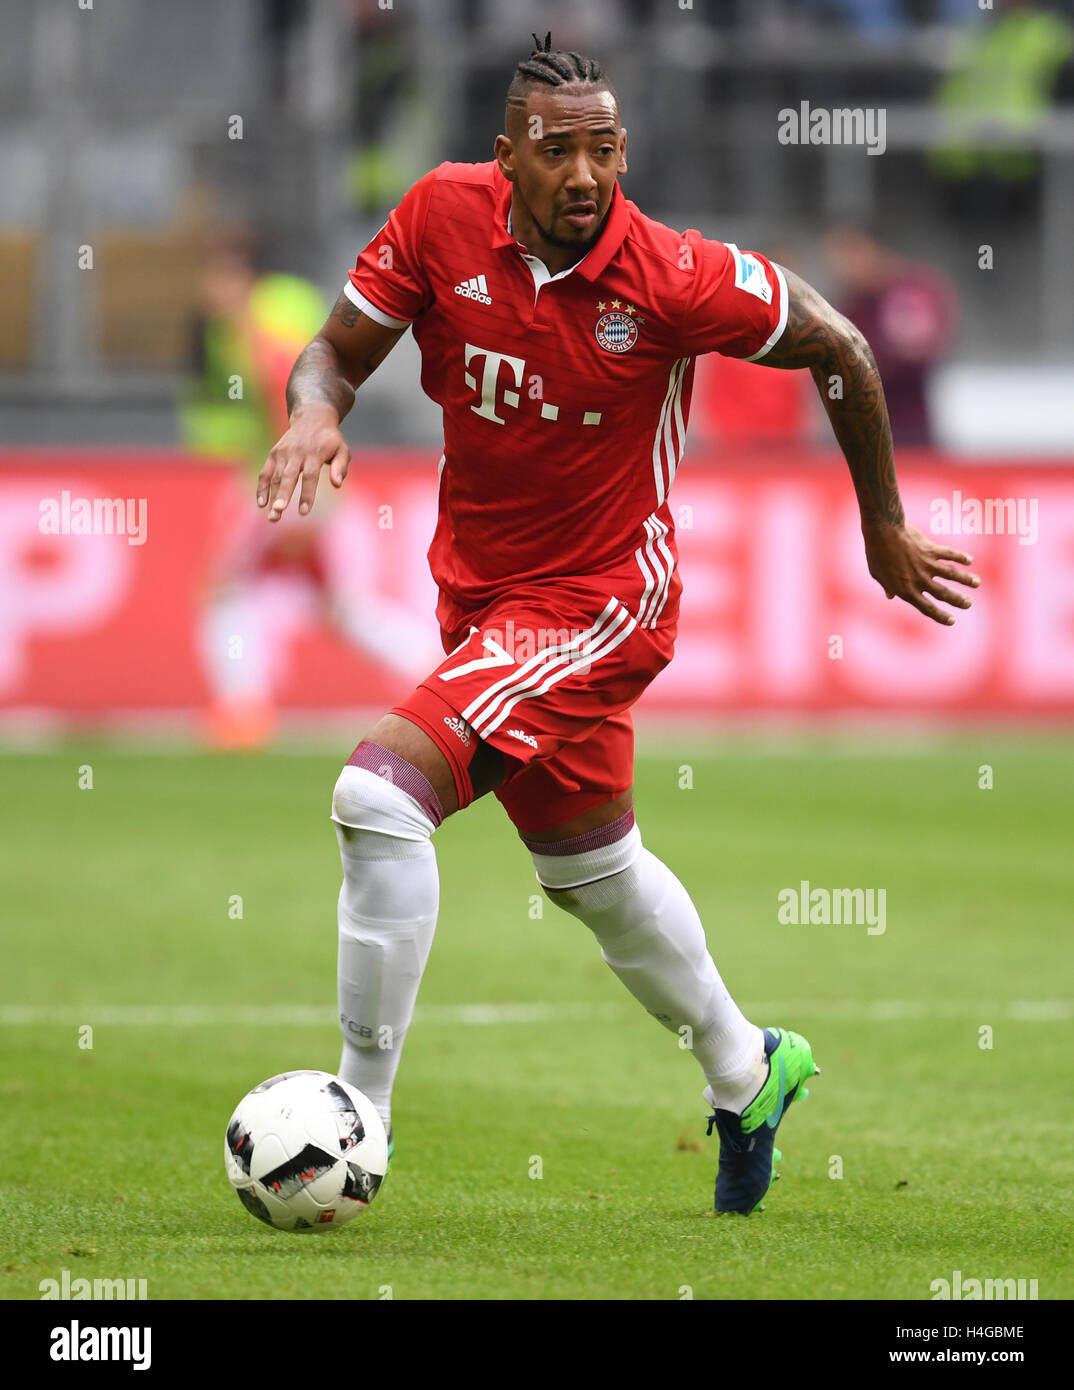 Munich's Jerome Boateng in action during the match between Eintracht Frankfurt and Bavaria Munich on the seventh match day of the German Bundesliga at Commerzbank-Arena in Frankfurt on the Main, Germany, 15 October 2016. PHOTO: ARNE DEDERT/dpa Stock Photo